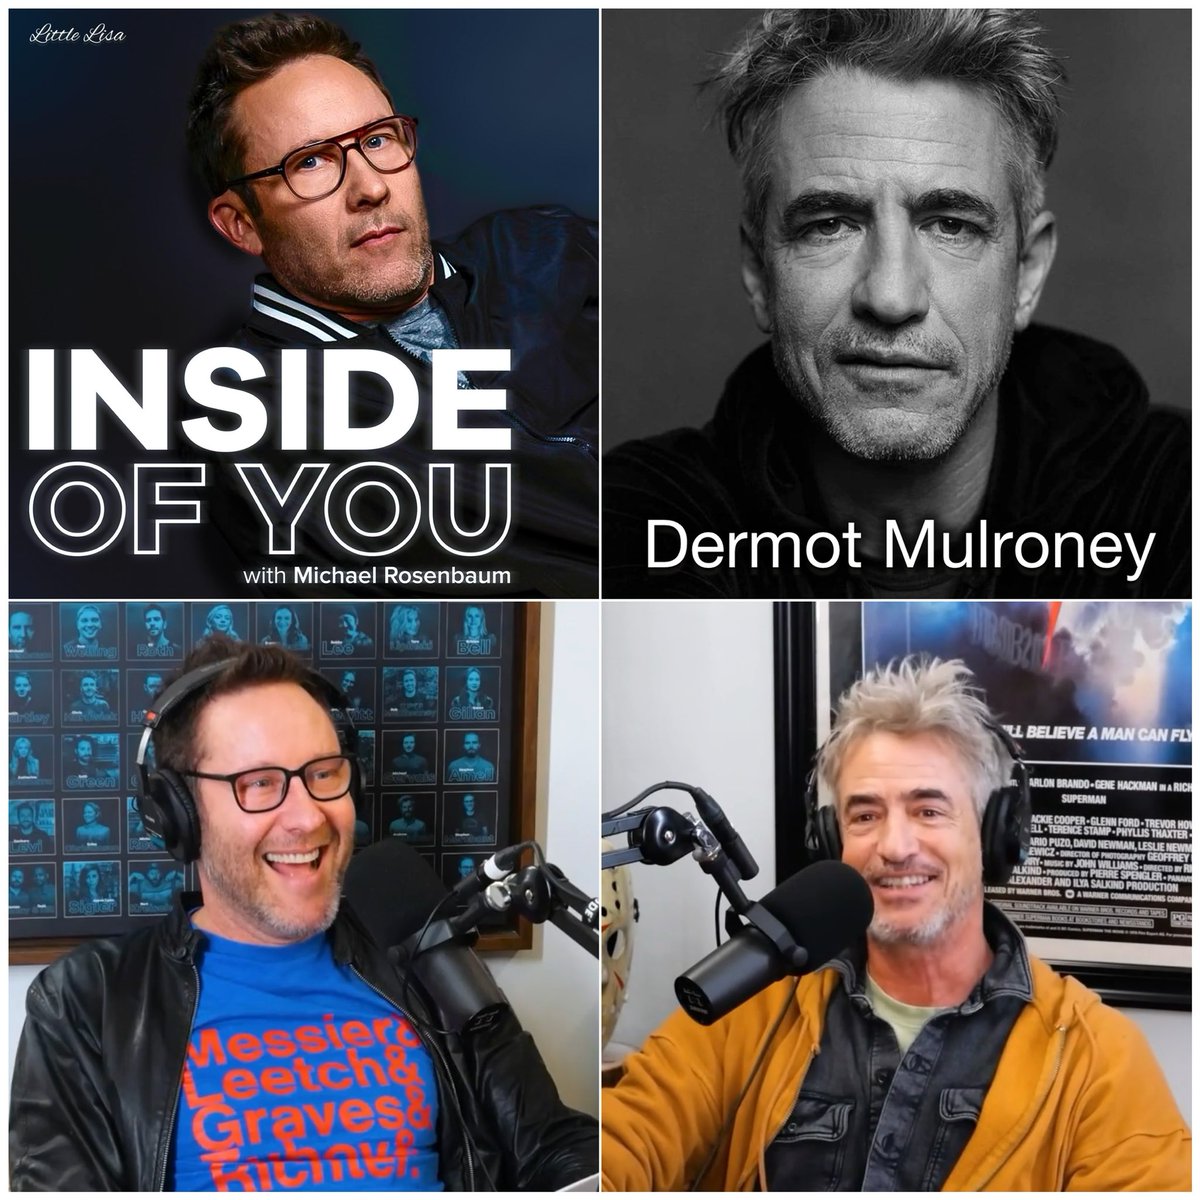 Dermot Mulroney (My Best Friend's Wedding, The Wedding Date) joins @michaelrosenbum on this week’s episode of @insideofyoupod 💙 Please check it out on all podcast platforms & watch in video format on YouTube. insideofyoupodcast.com/show 📺: youtu.be/YqQ5g0ST3BU?si…